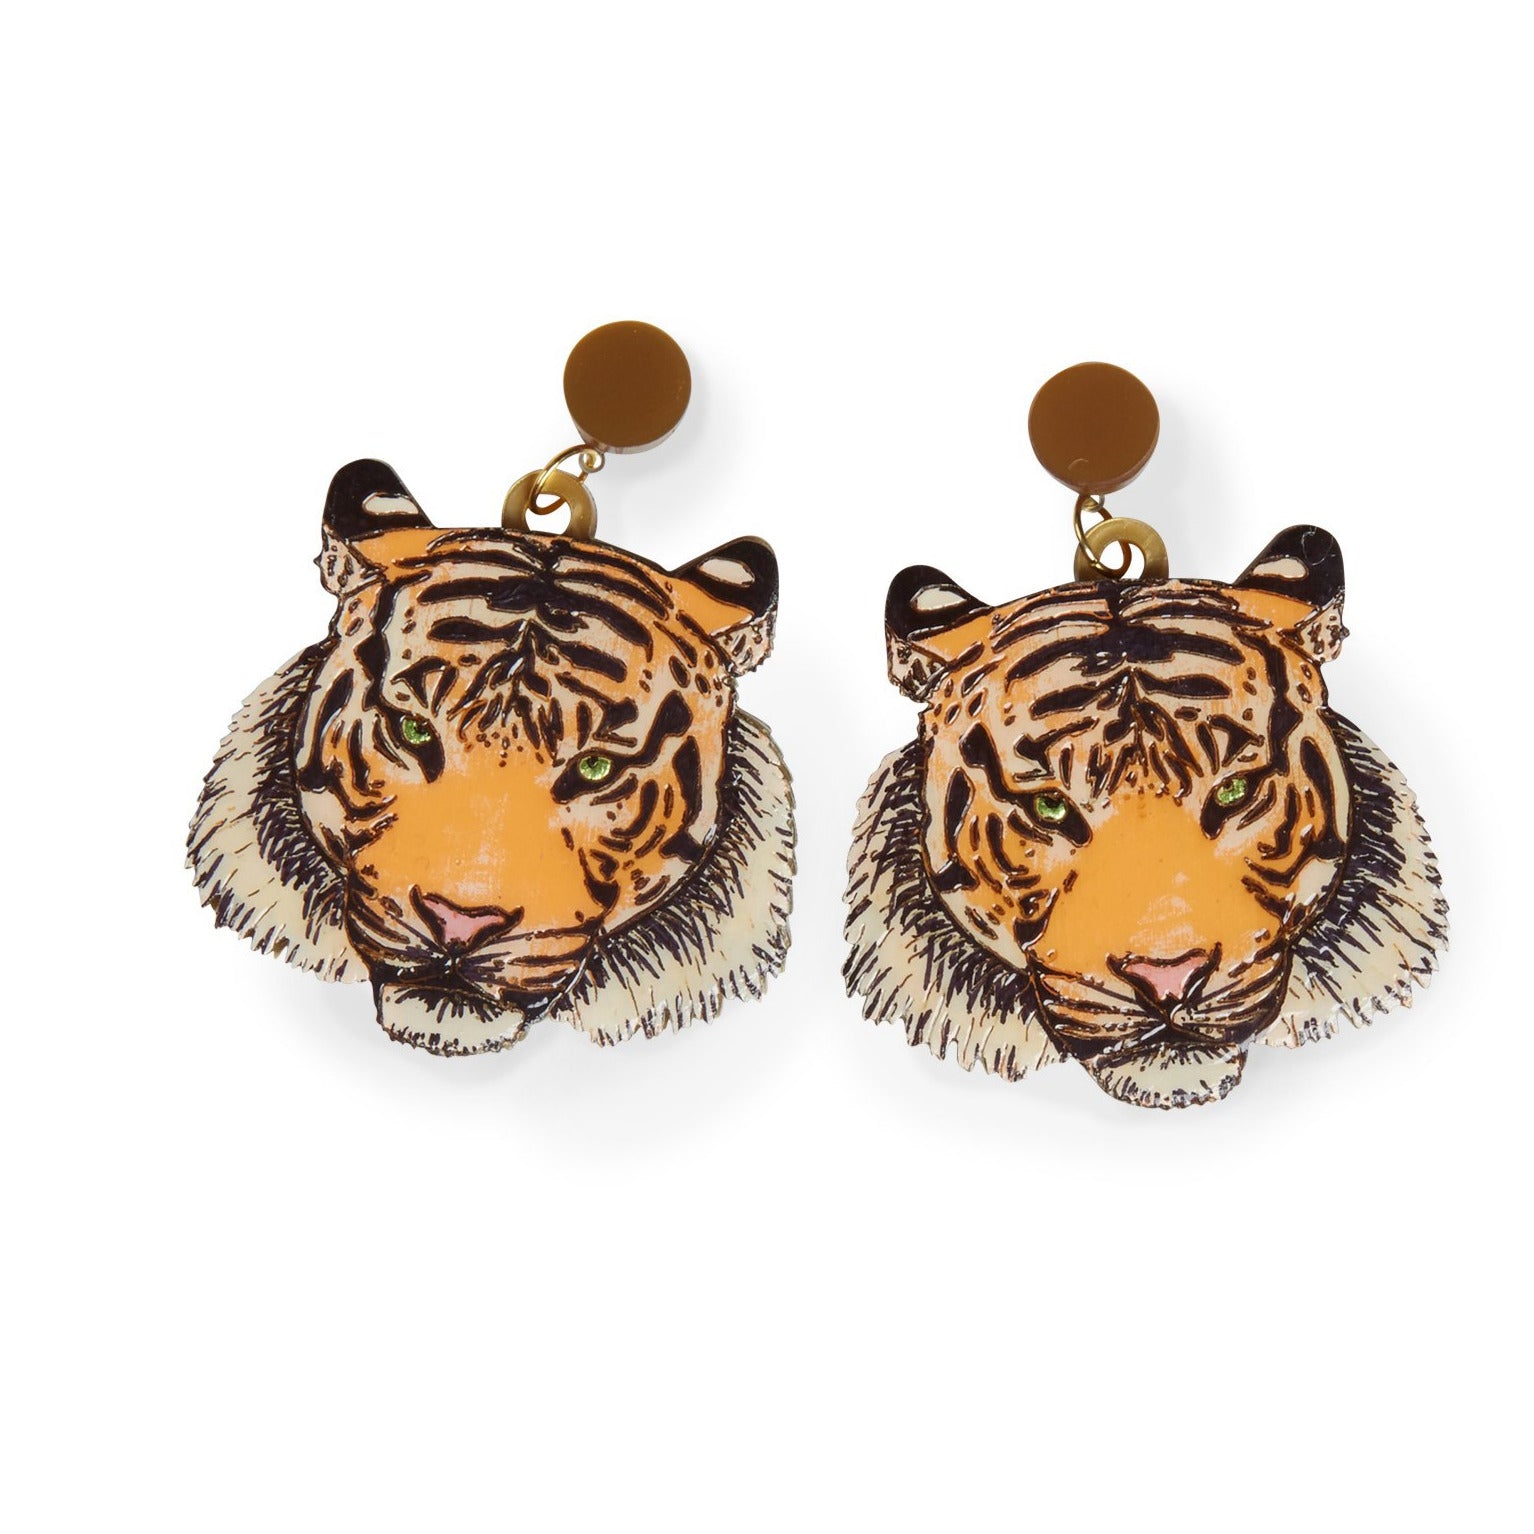 Tiger Laser-cut Acrylic Hand-painted British-made Retro Earrings